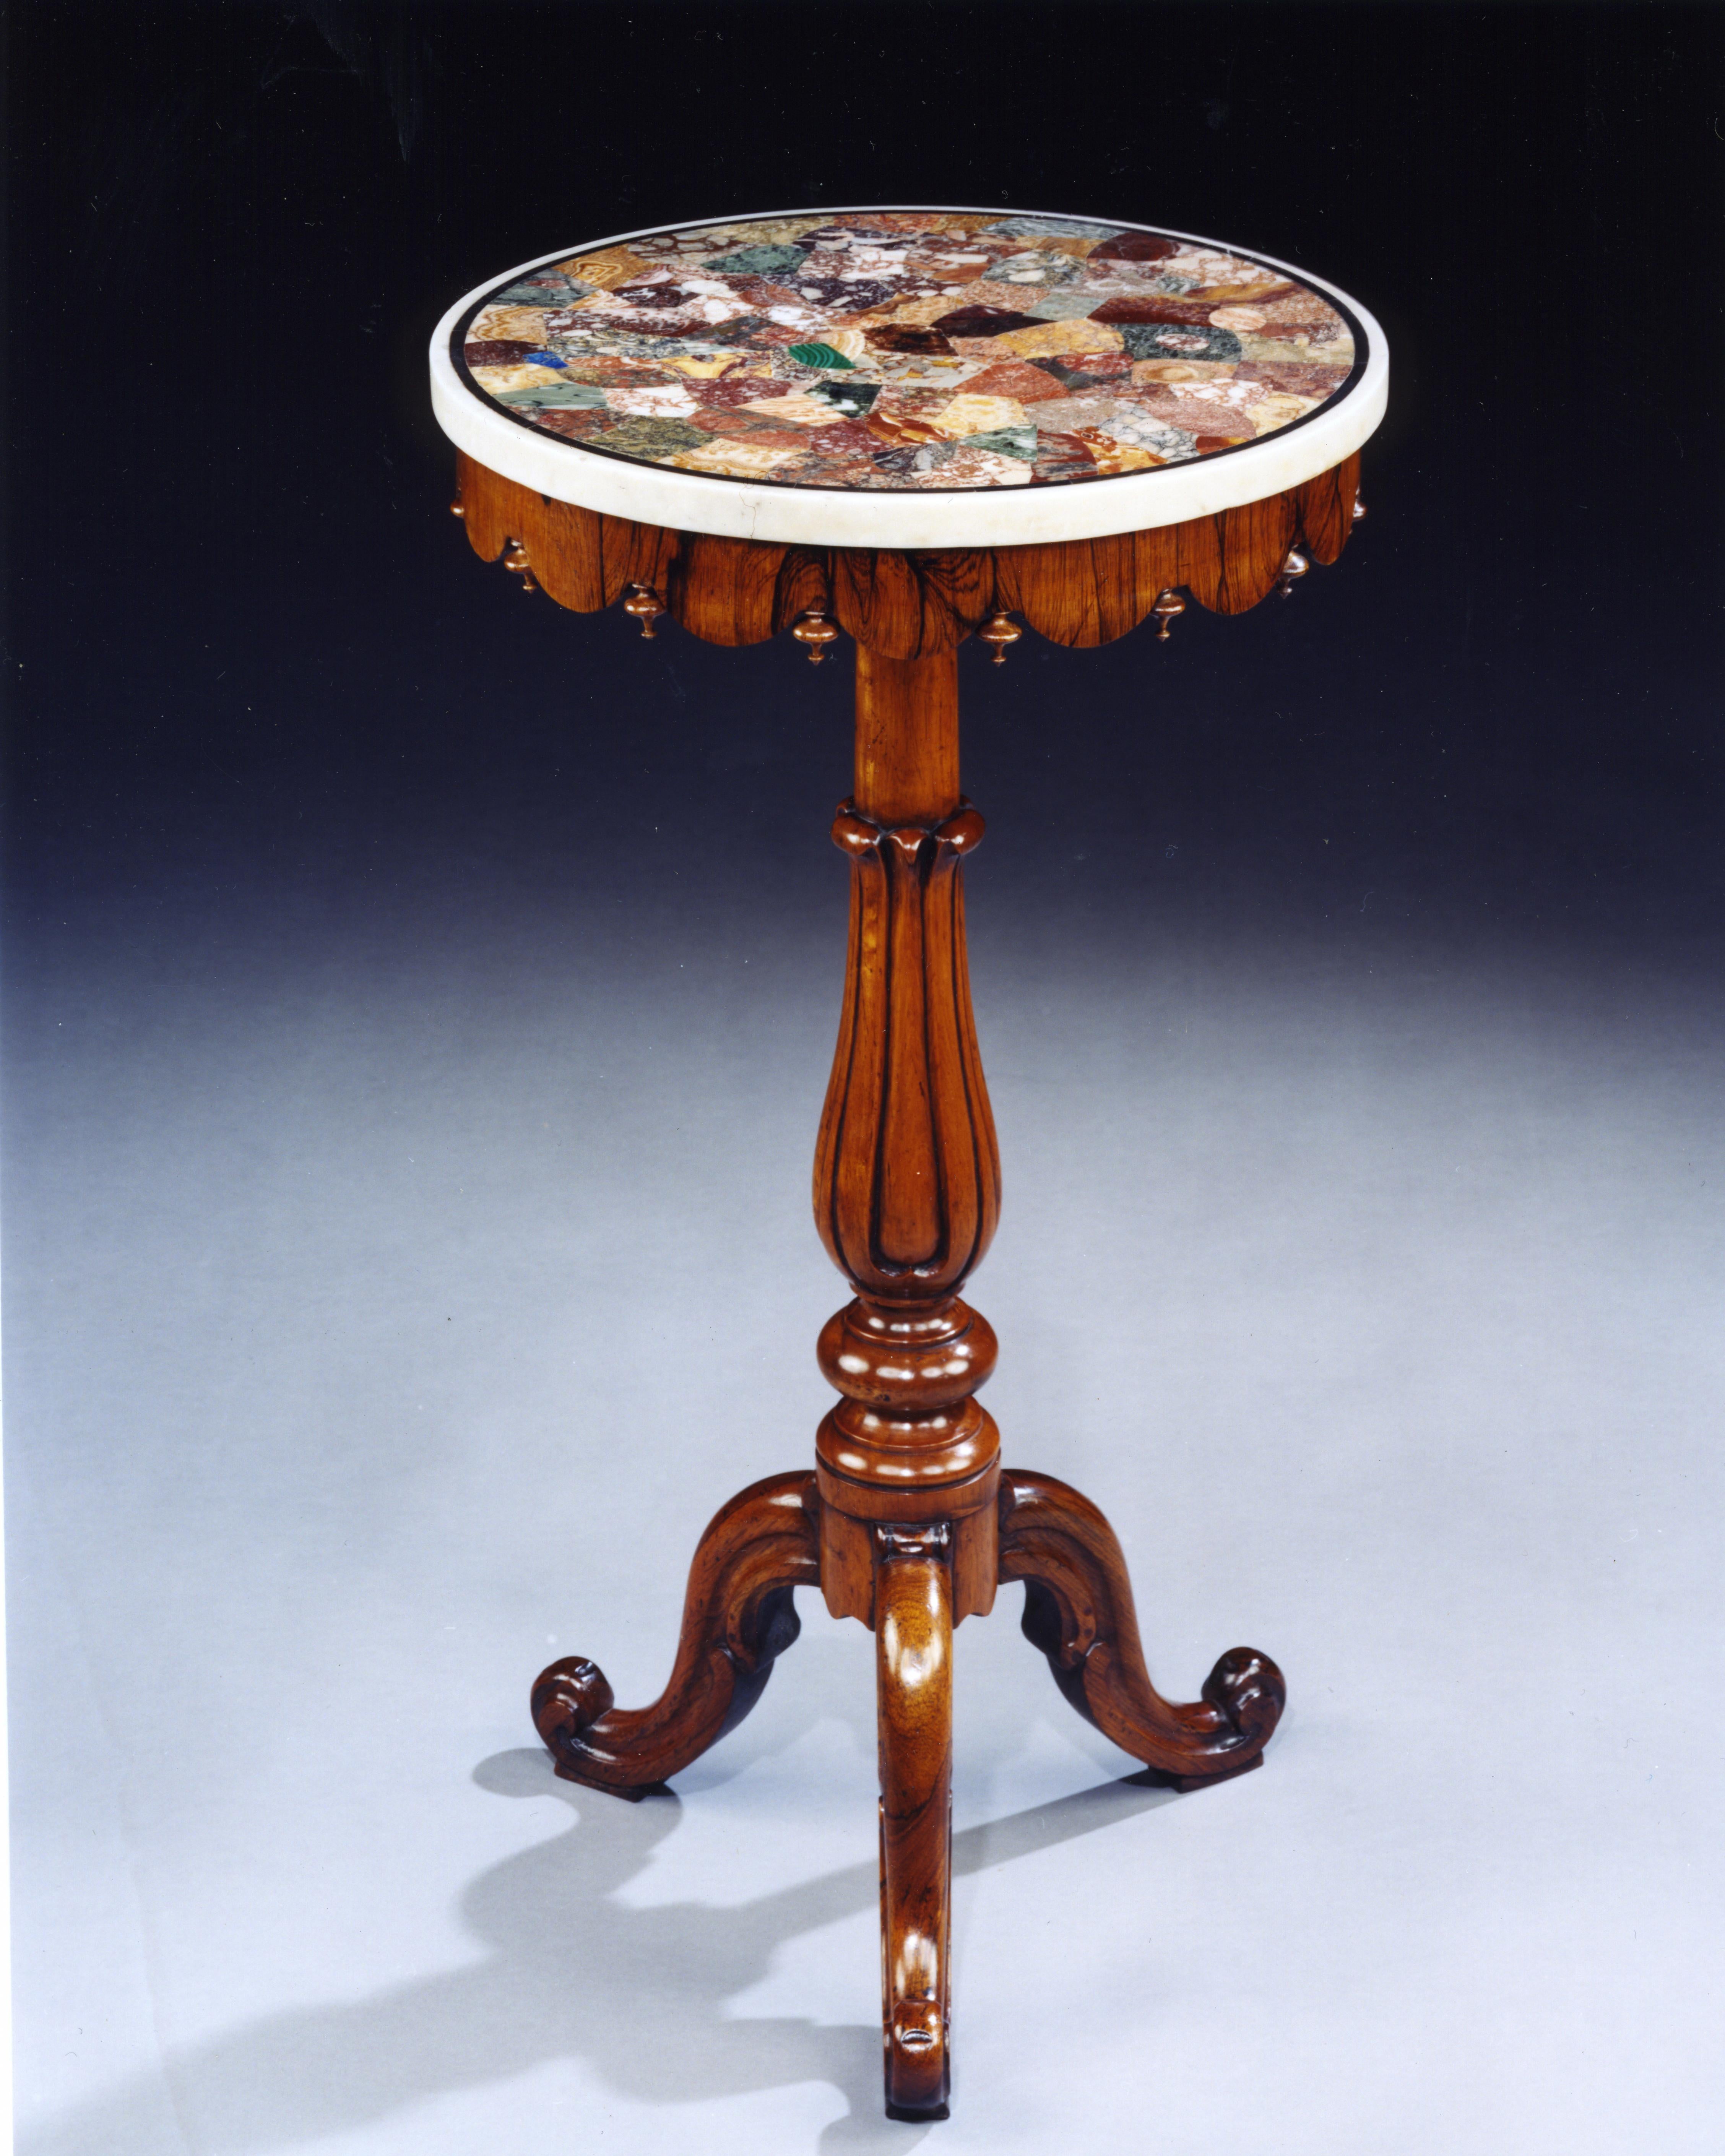 The design and style of this table relates to ‘Neo-Classical Furniture Designs’ by Thomas King, 1829.